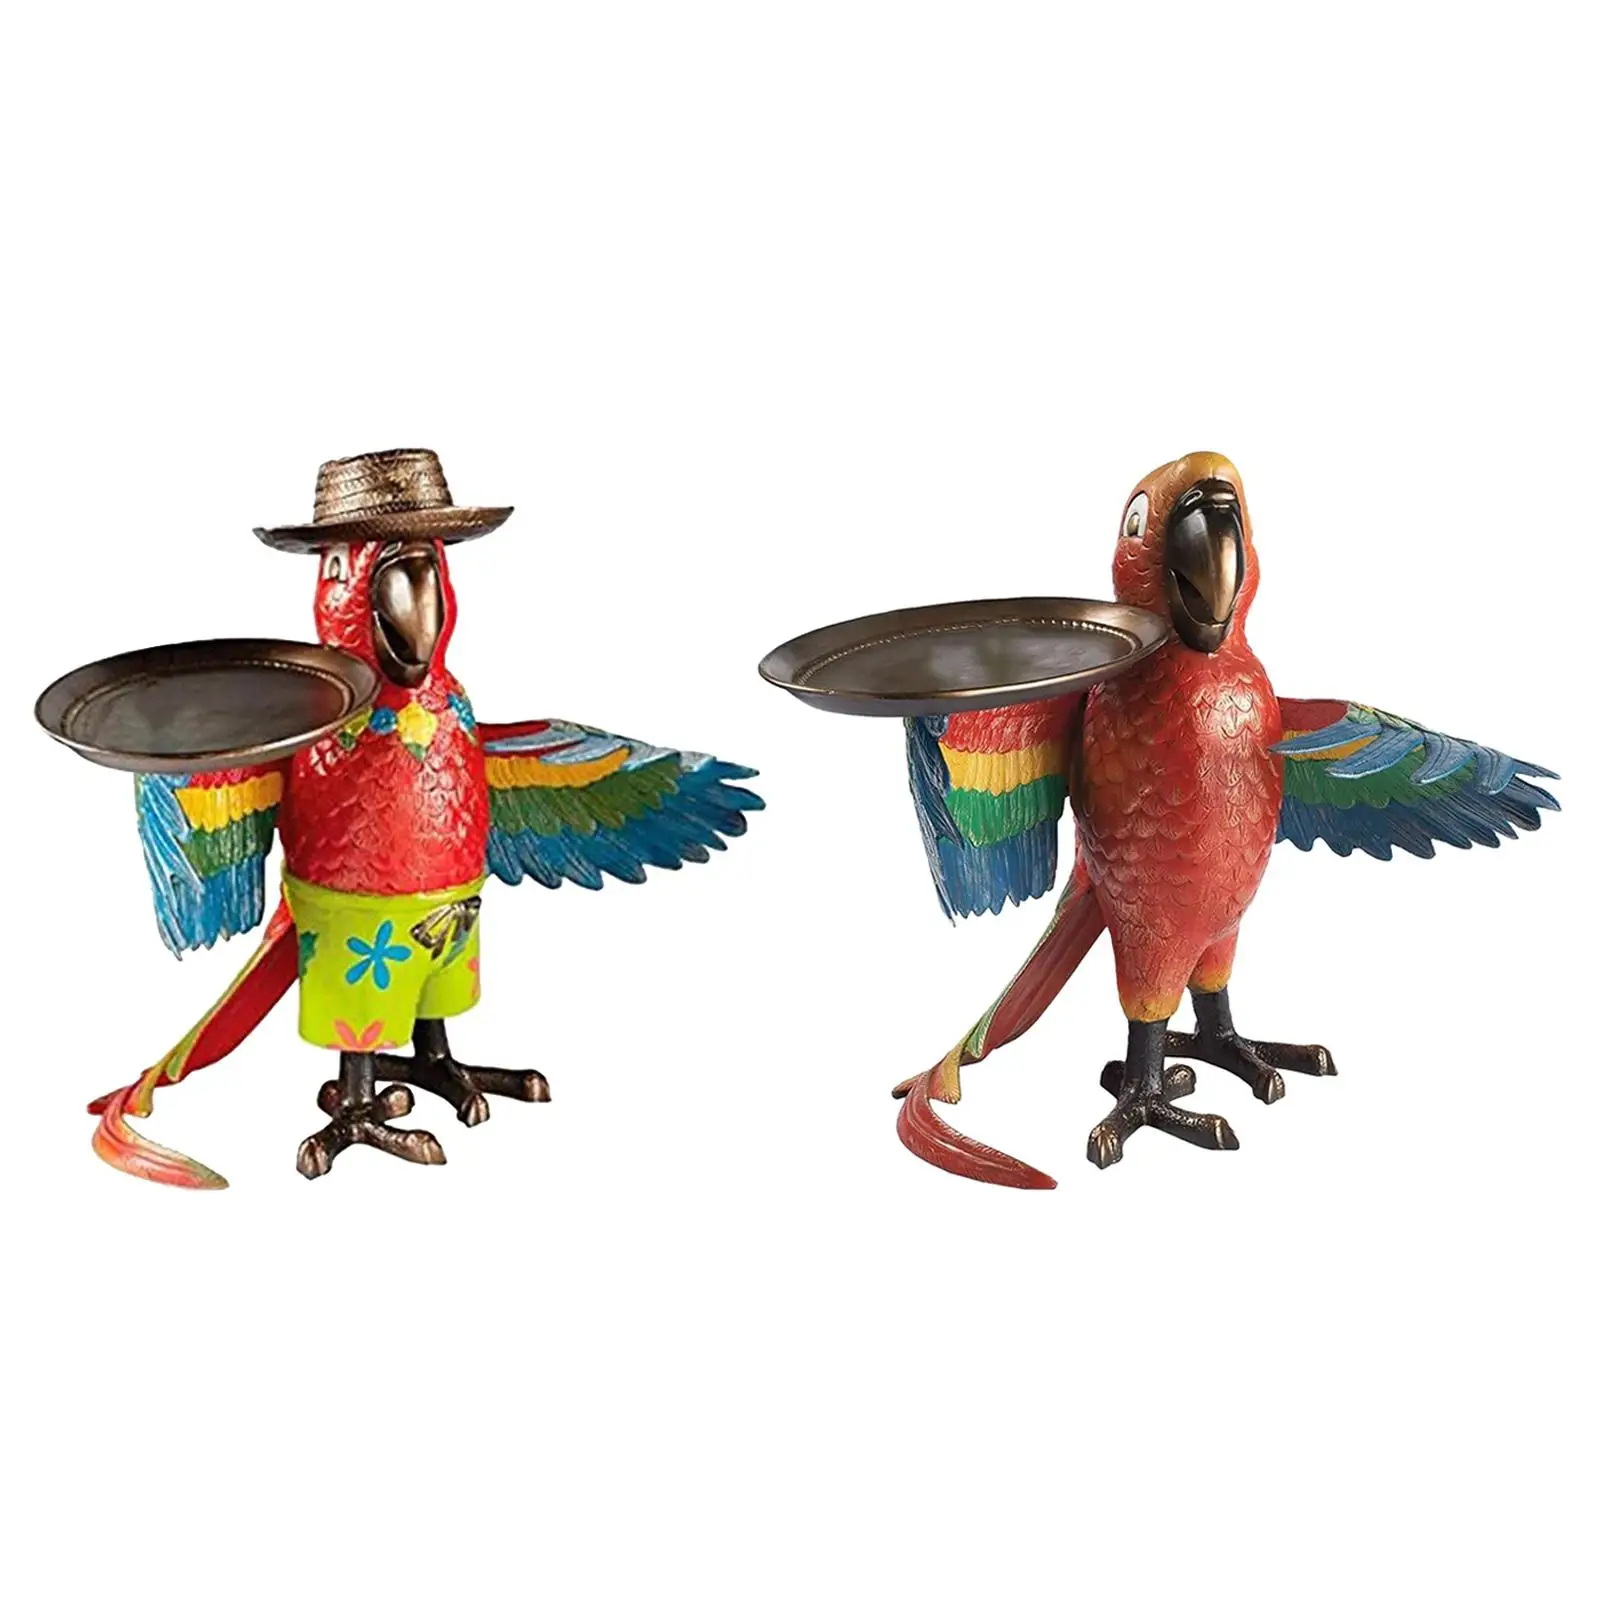 2x  Parrot Statue Serving Tray Trinket Jewelry Plate Furniture Decor